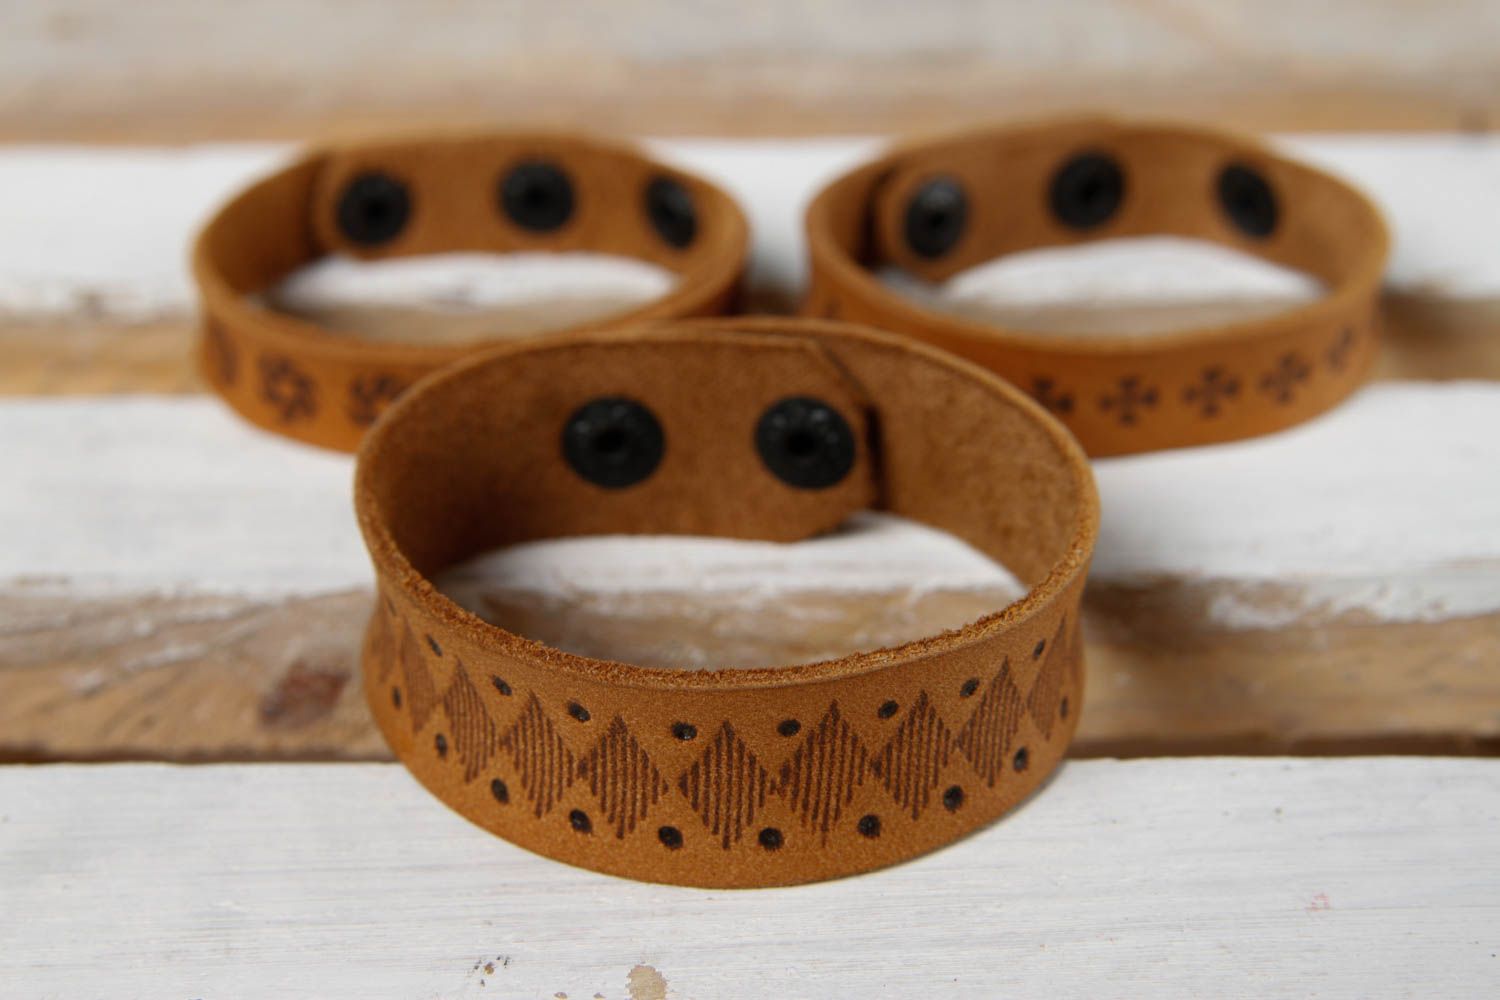 Personalized leather bracelets from childrens drawings | tasarim takarim  designed by kids